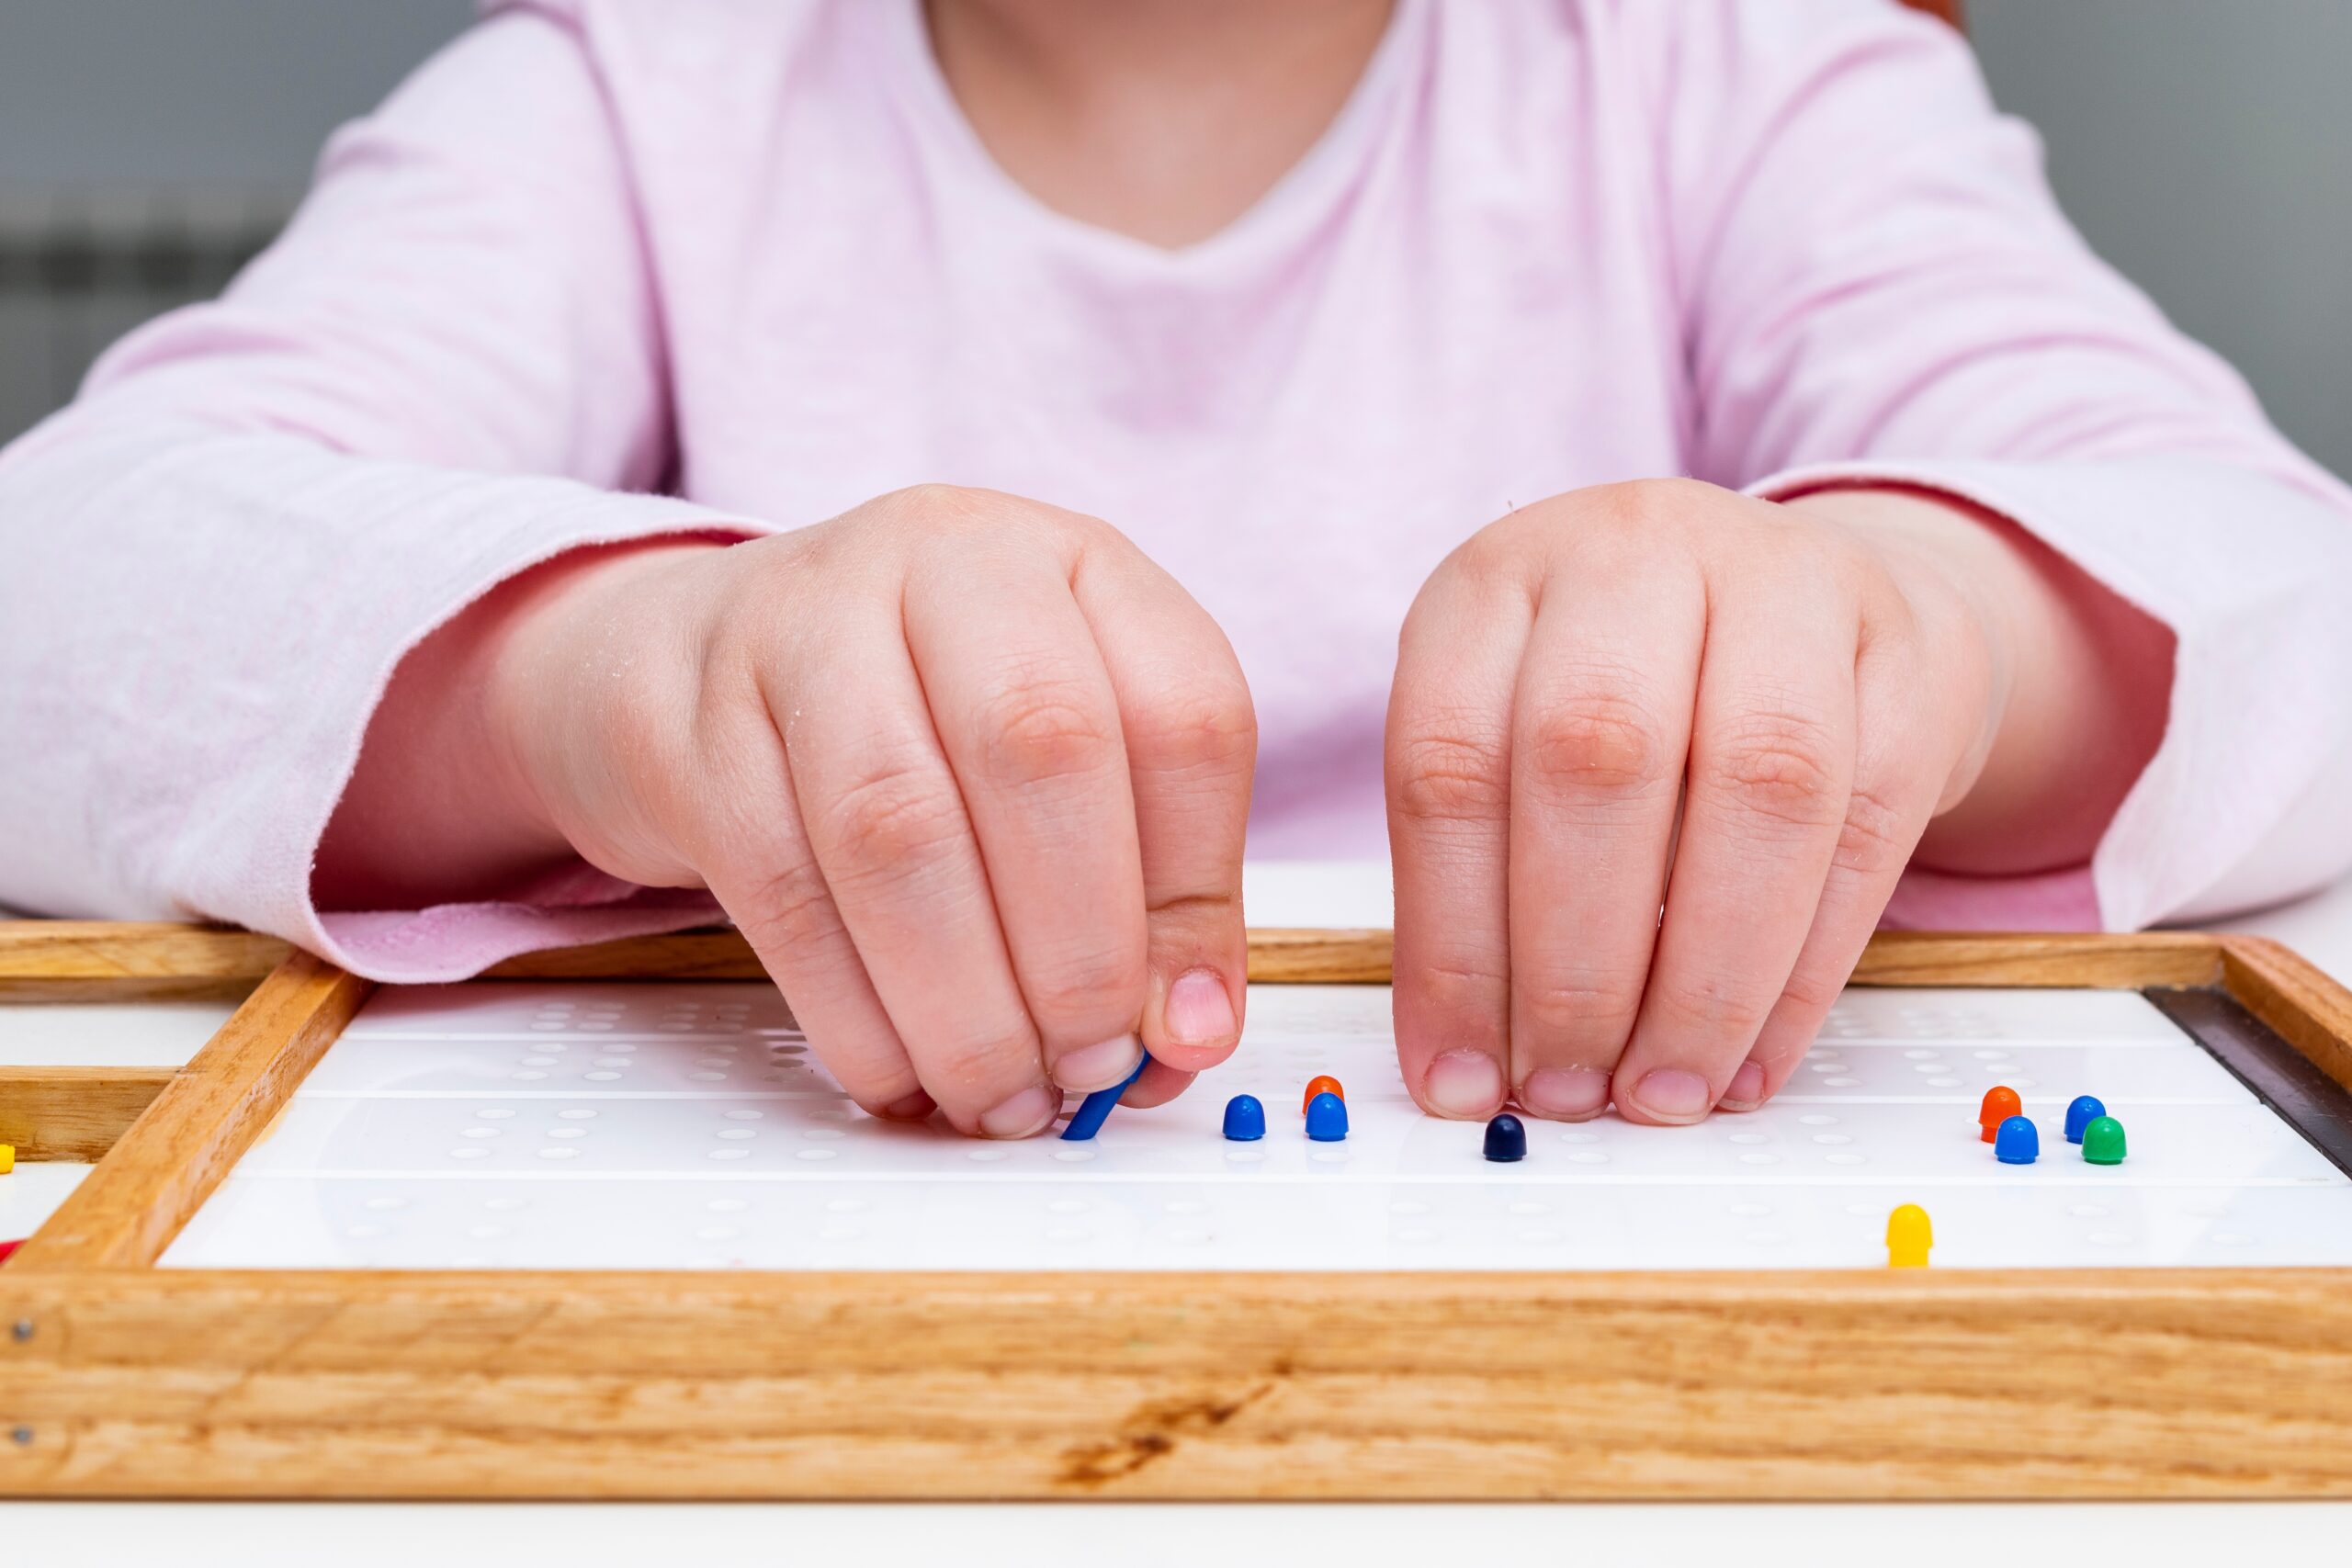 A child sitting at a table with her hands placing small pegs into braille cells. 